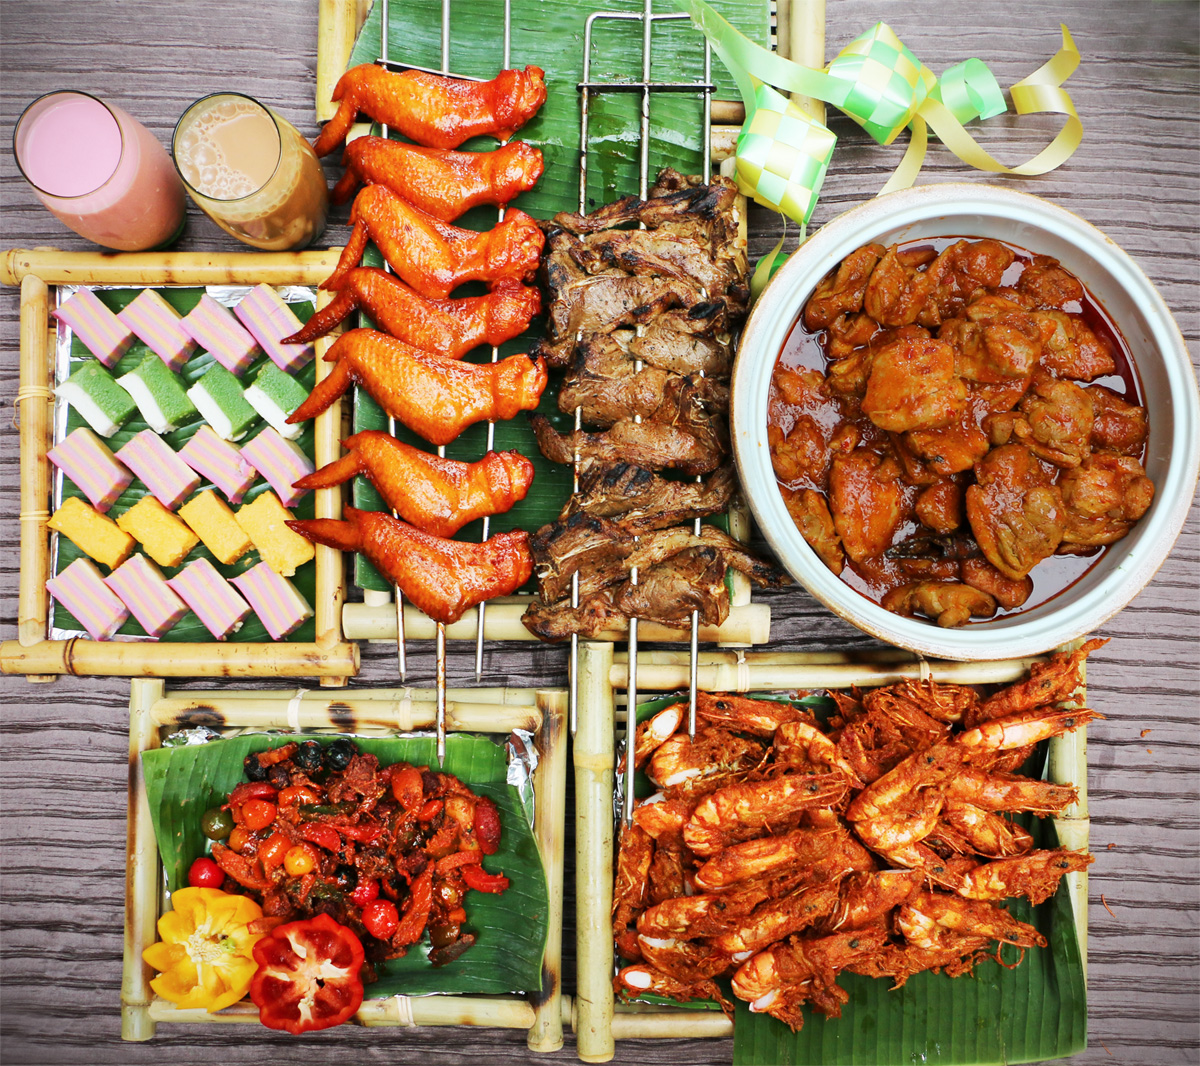 1. Malaysian specialities served at Lemon Garden during the Festive Buffet